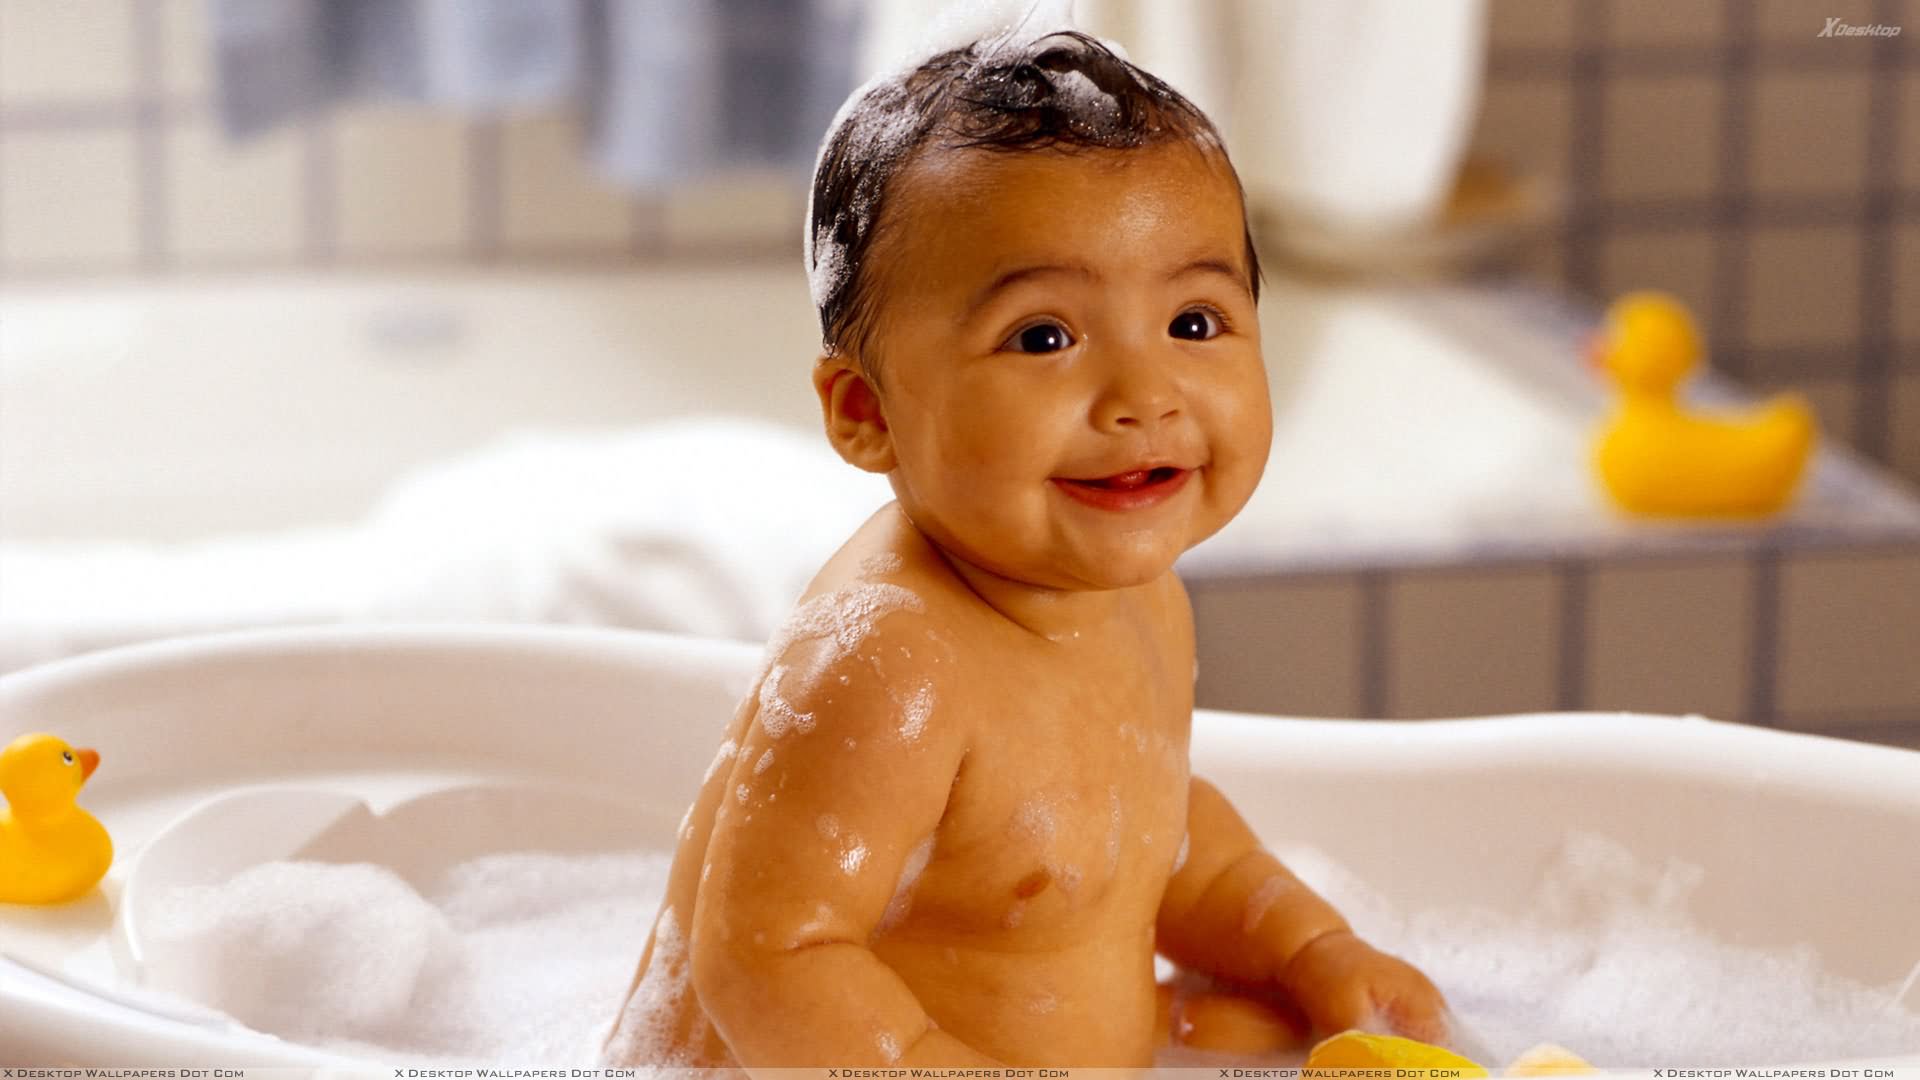 Cute Baby Bathing - Baby Hd Images India - HD Wallpaper 